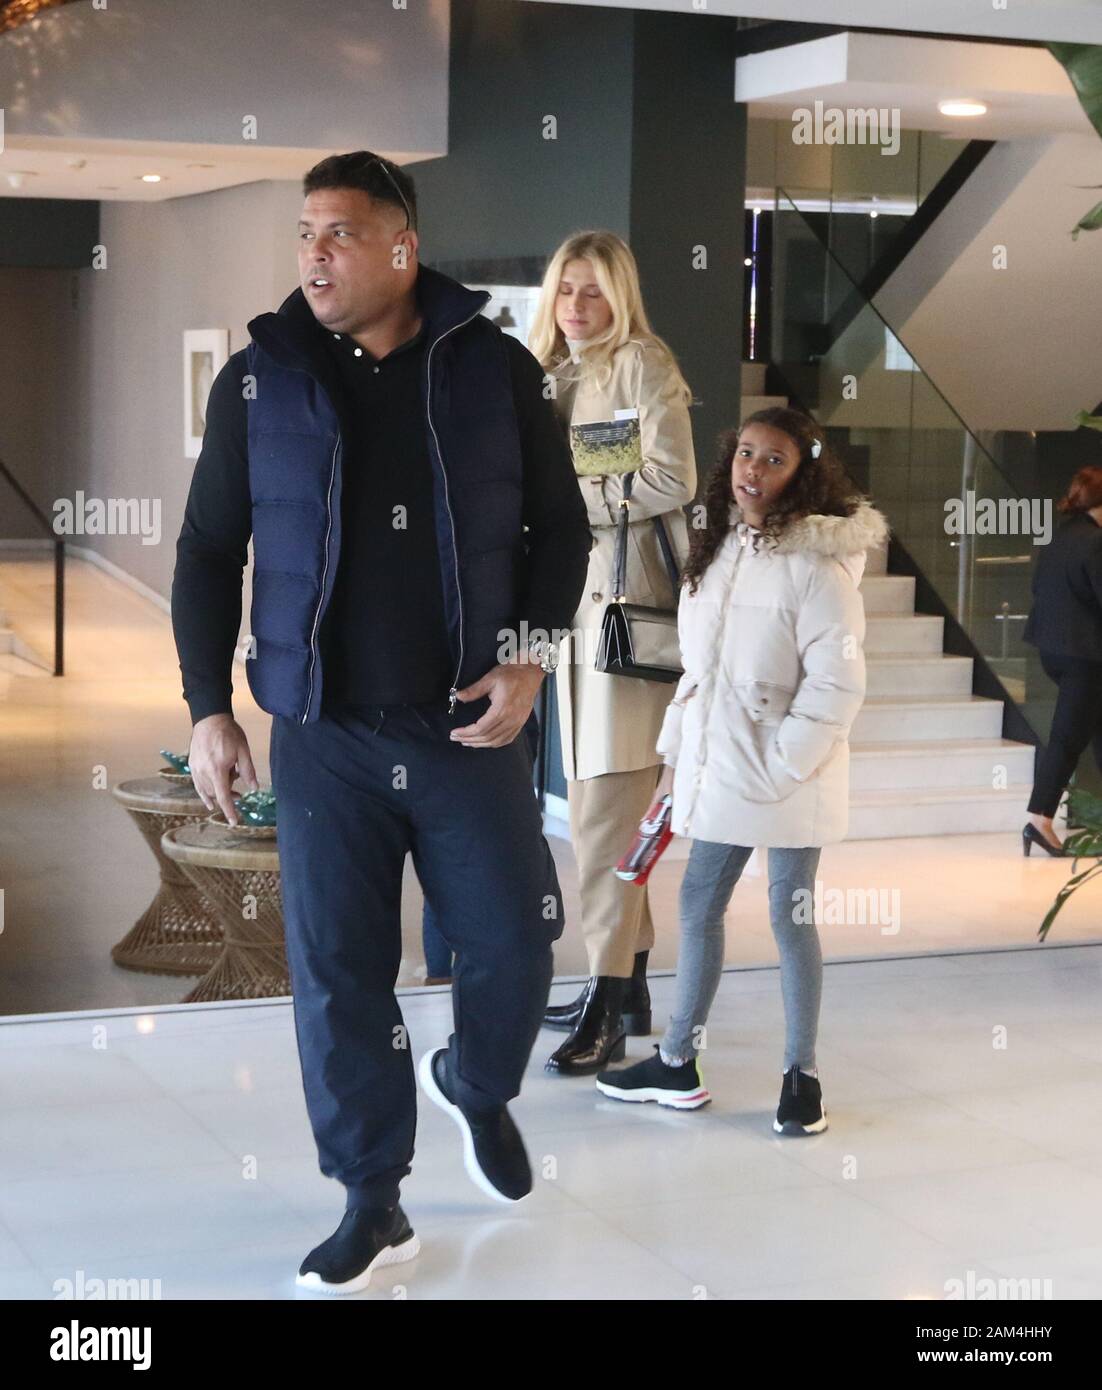 Malaga, Spain. 11th Jan 2020. The Brazilian player Ronaldo Nazario is  visiting the city of Malaga who has come with his girlfriend Celina Locks  and his two daughters to attend the match